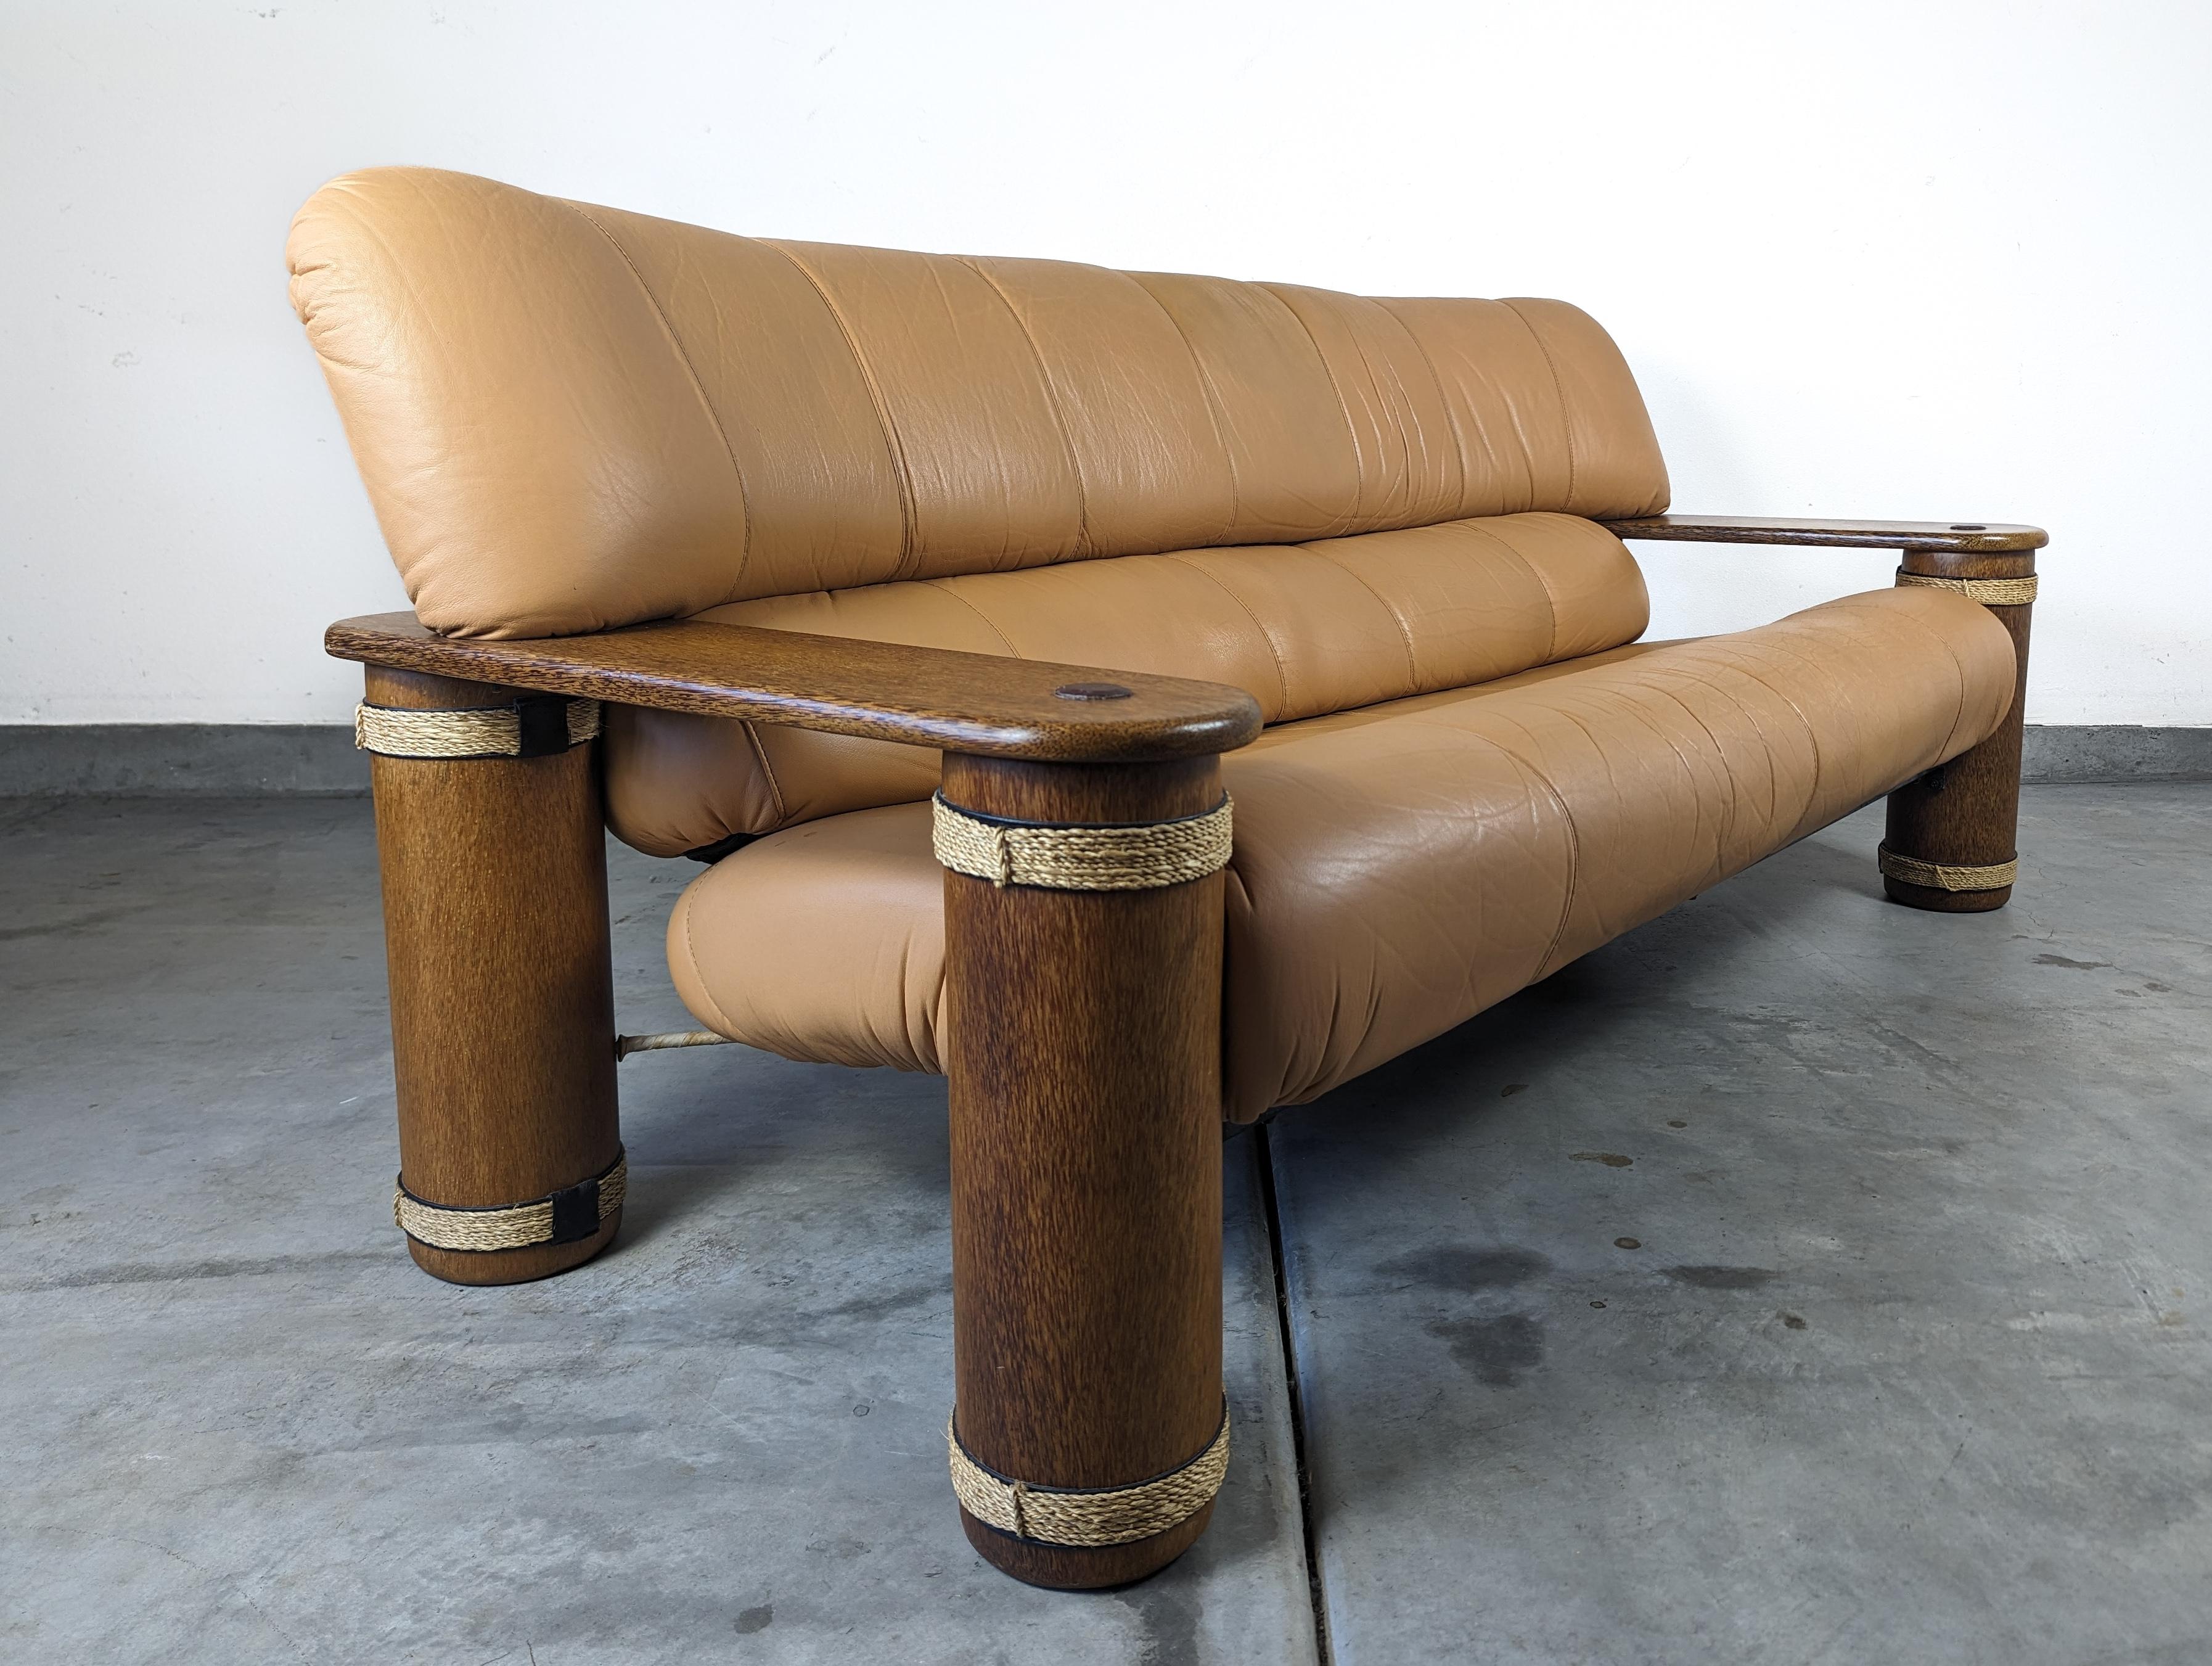 Vintage Leather and Palmwood Three-Seat Sofa by Pacific Green, c1990s For Sale 4